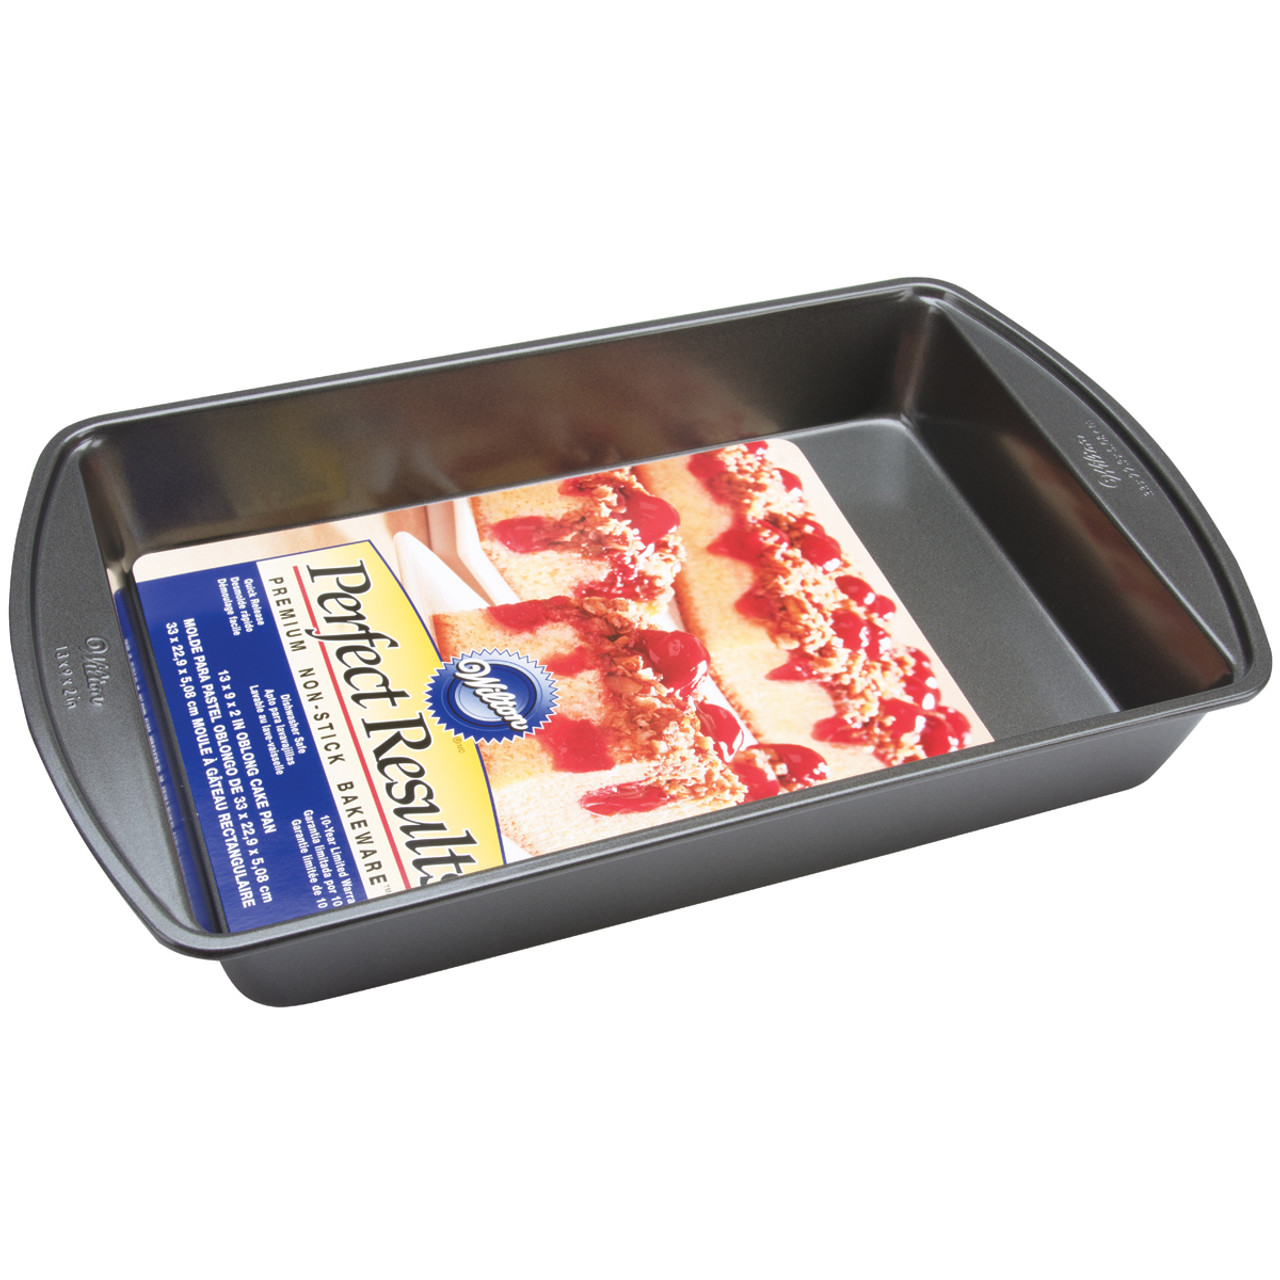 Wilton Bake It Better Non-Stick Oblong Cake Pan with Lid and Handle, 9 x 13-inch